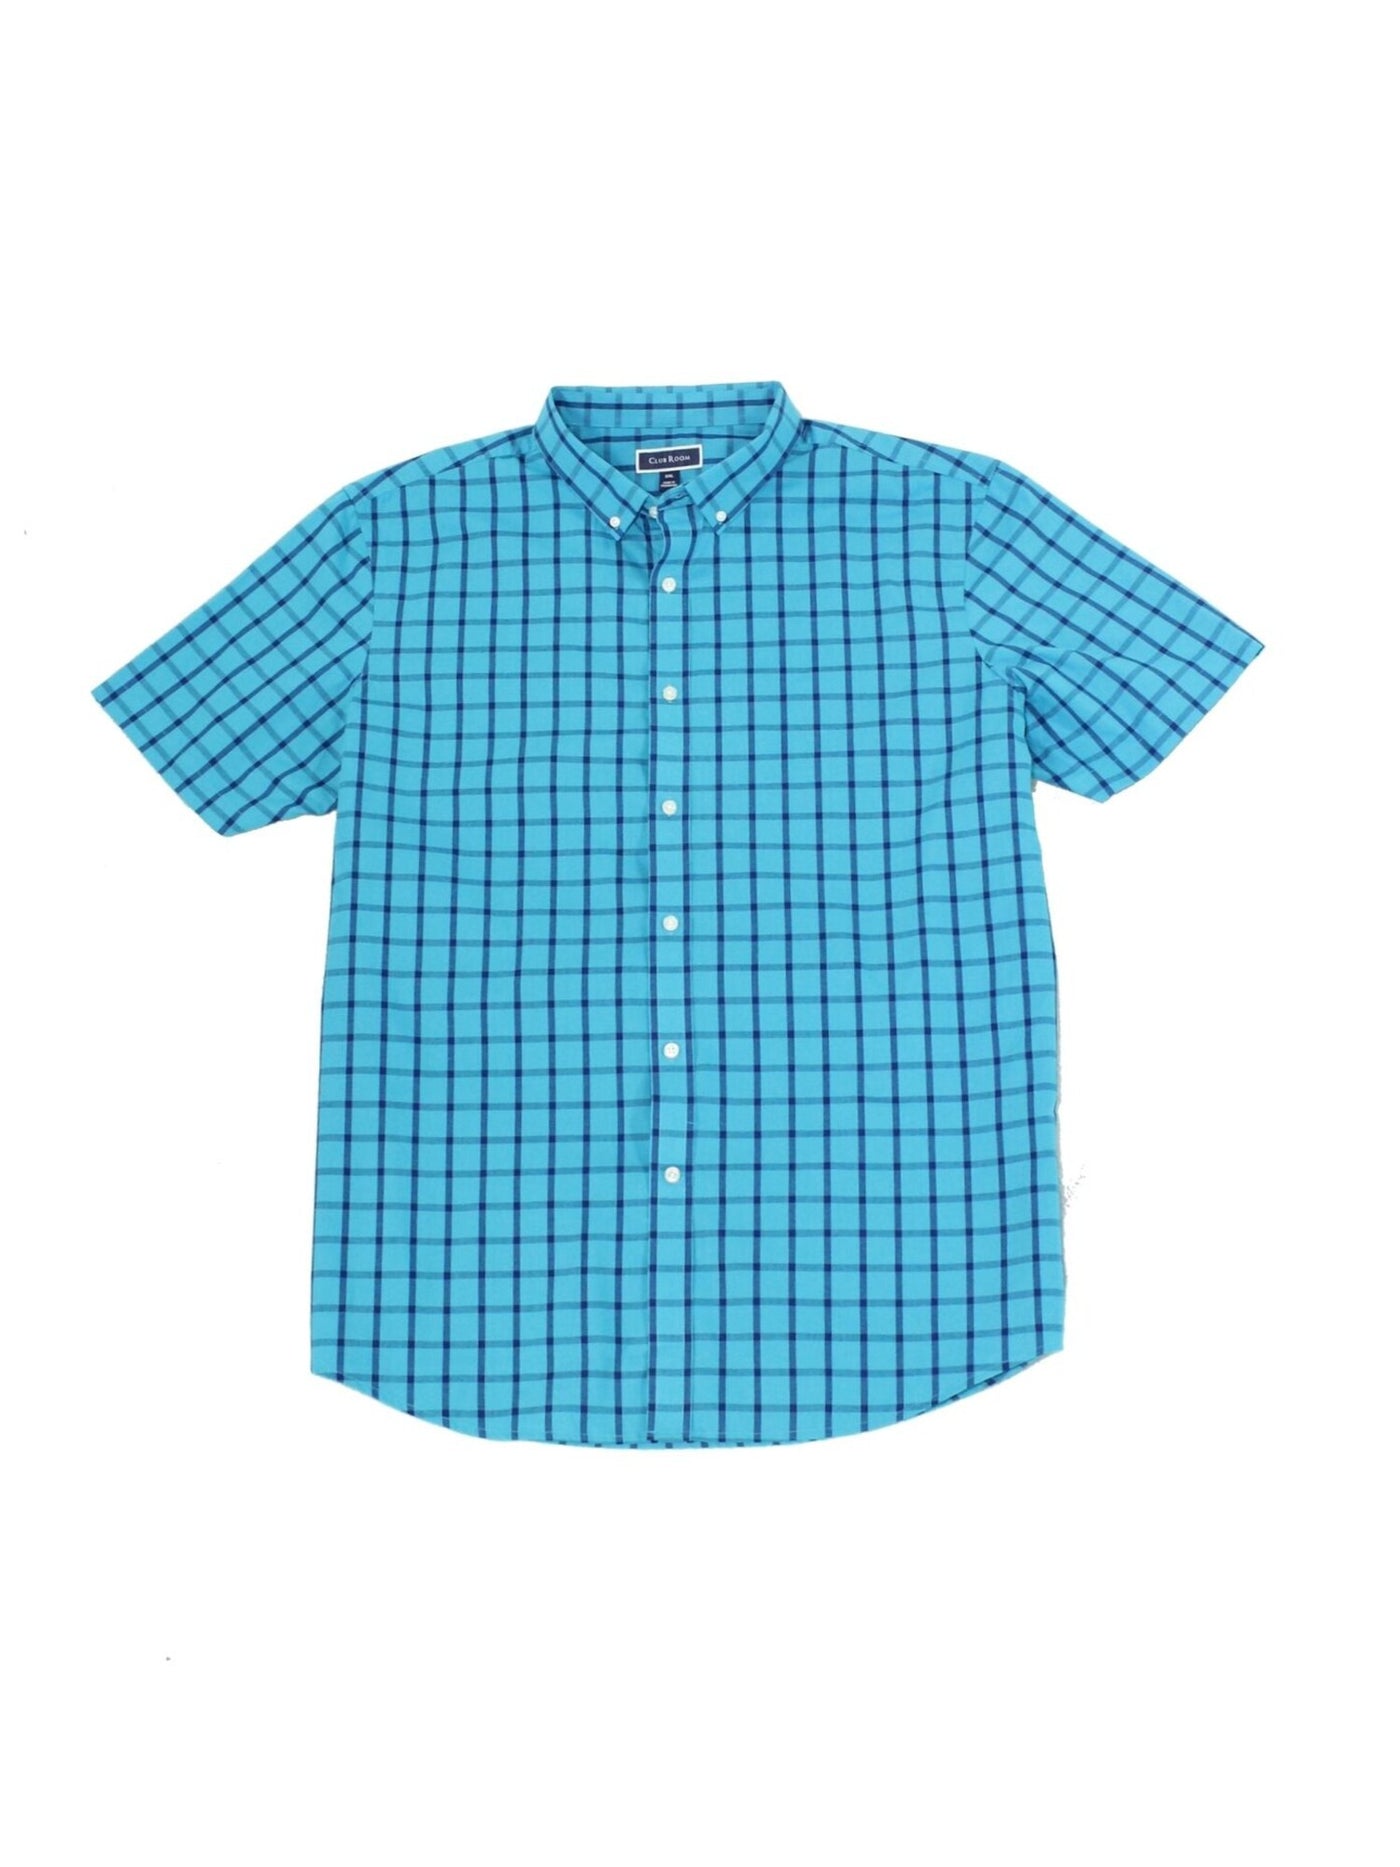 CLUBROOM Mens Turquoise Check Collared Dress Shirt M